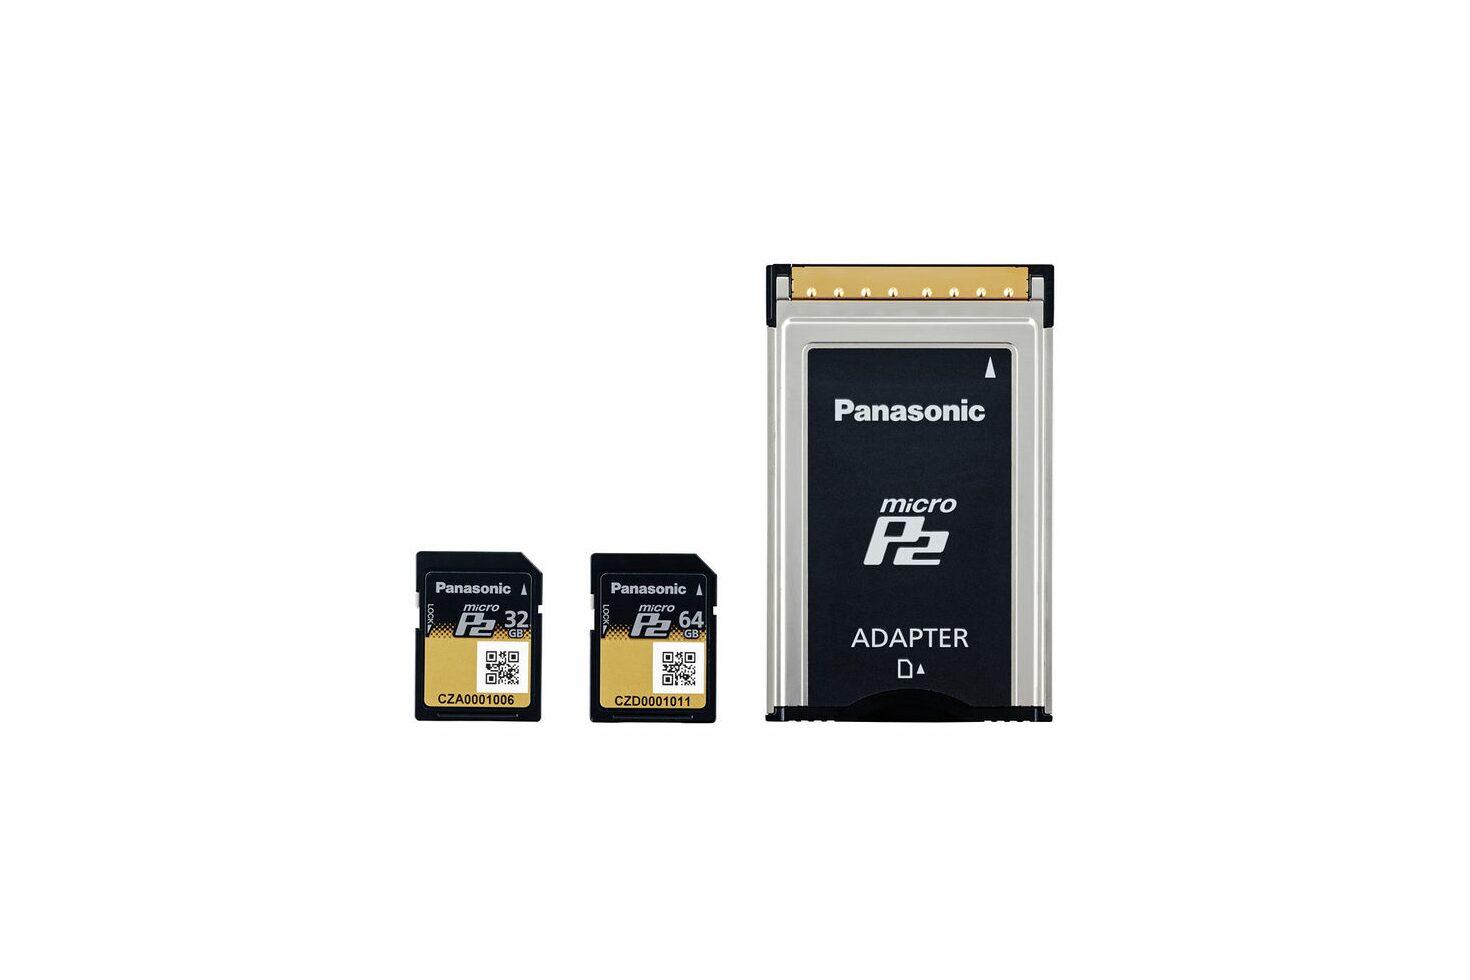 AJ-P2AD1G Image microP2 Memory Card Adapter with microSD Cards